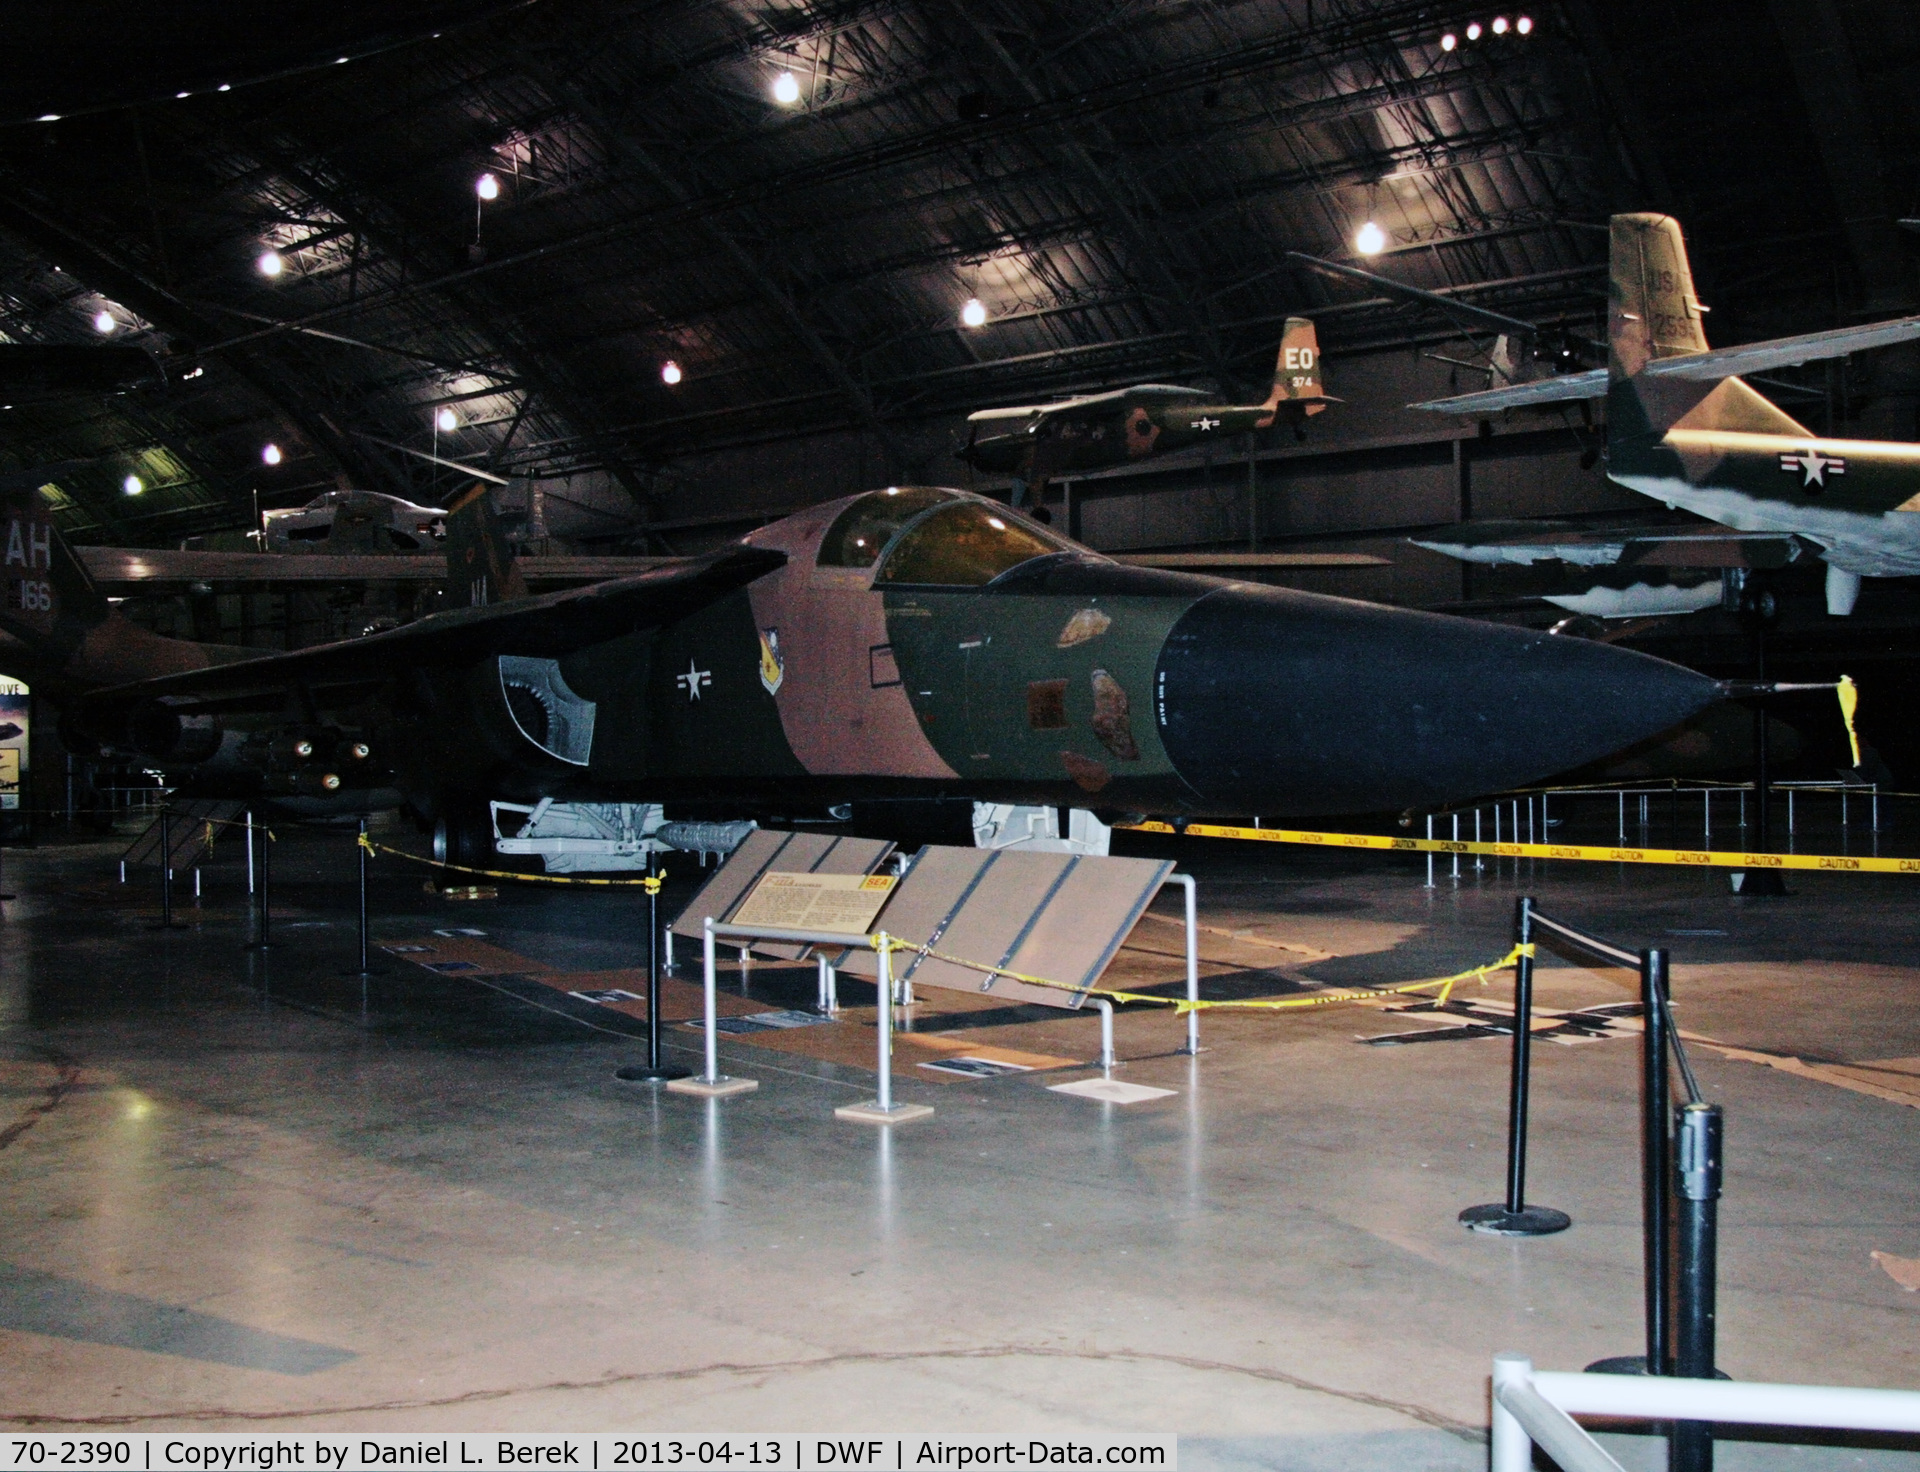 70-2390, 1970 General Dynamics F-111F Aardvark C/N E2-29, The U.S. Air Force version of this U.S. Navy sing-wing fighter-bomber served in both Southeast Asia and Iran (Desert Shield).